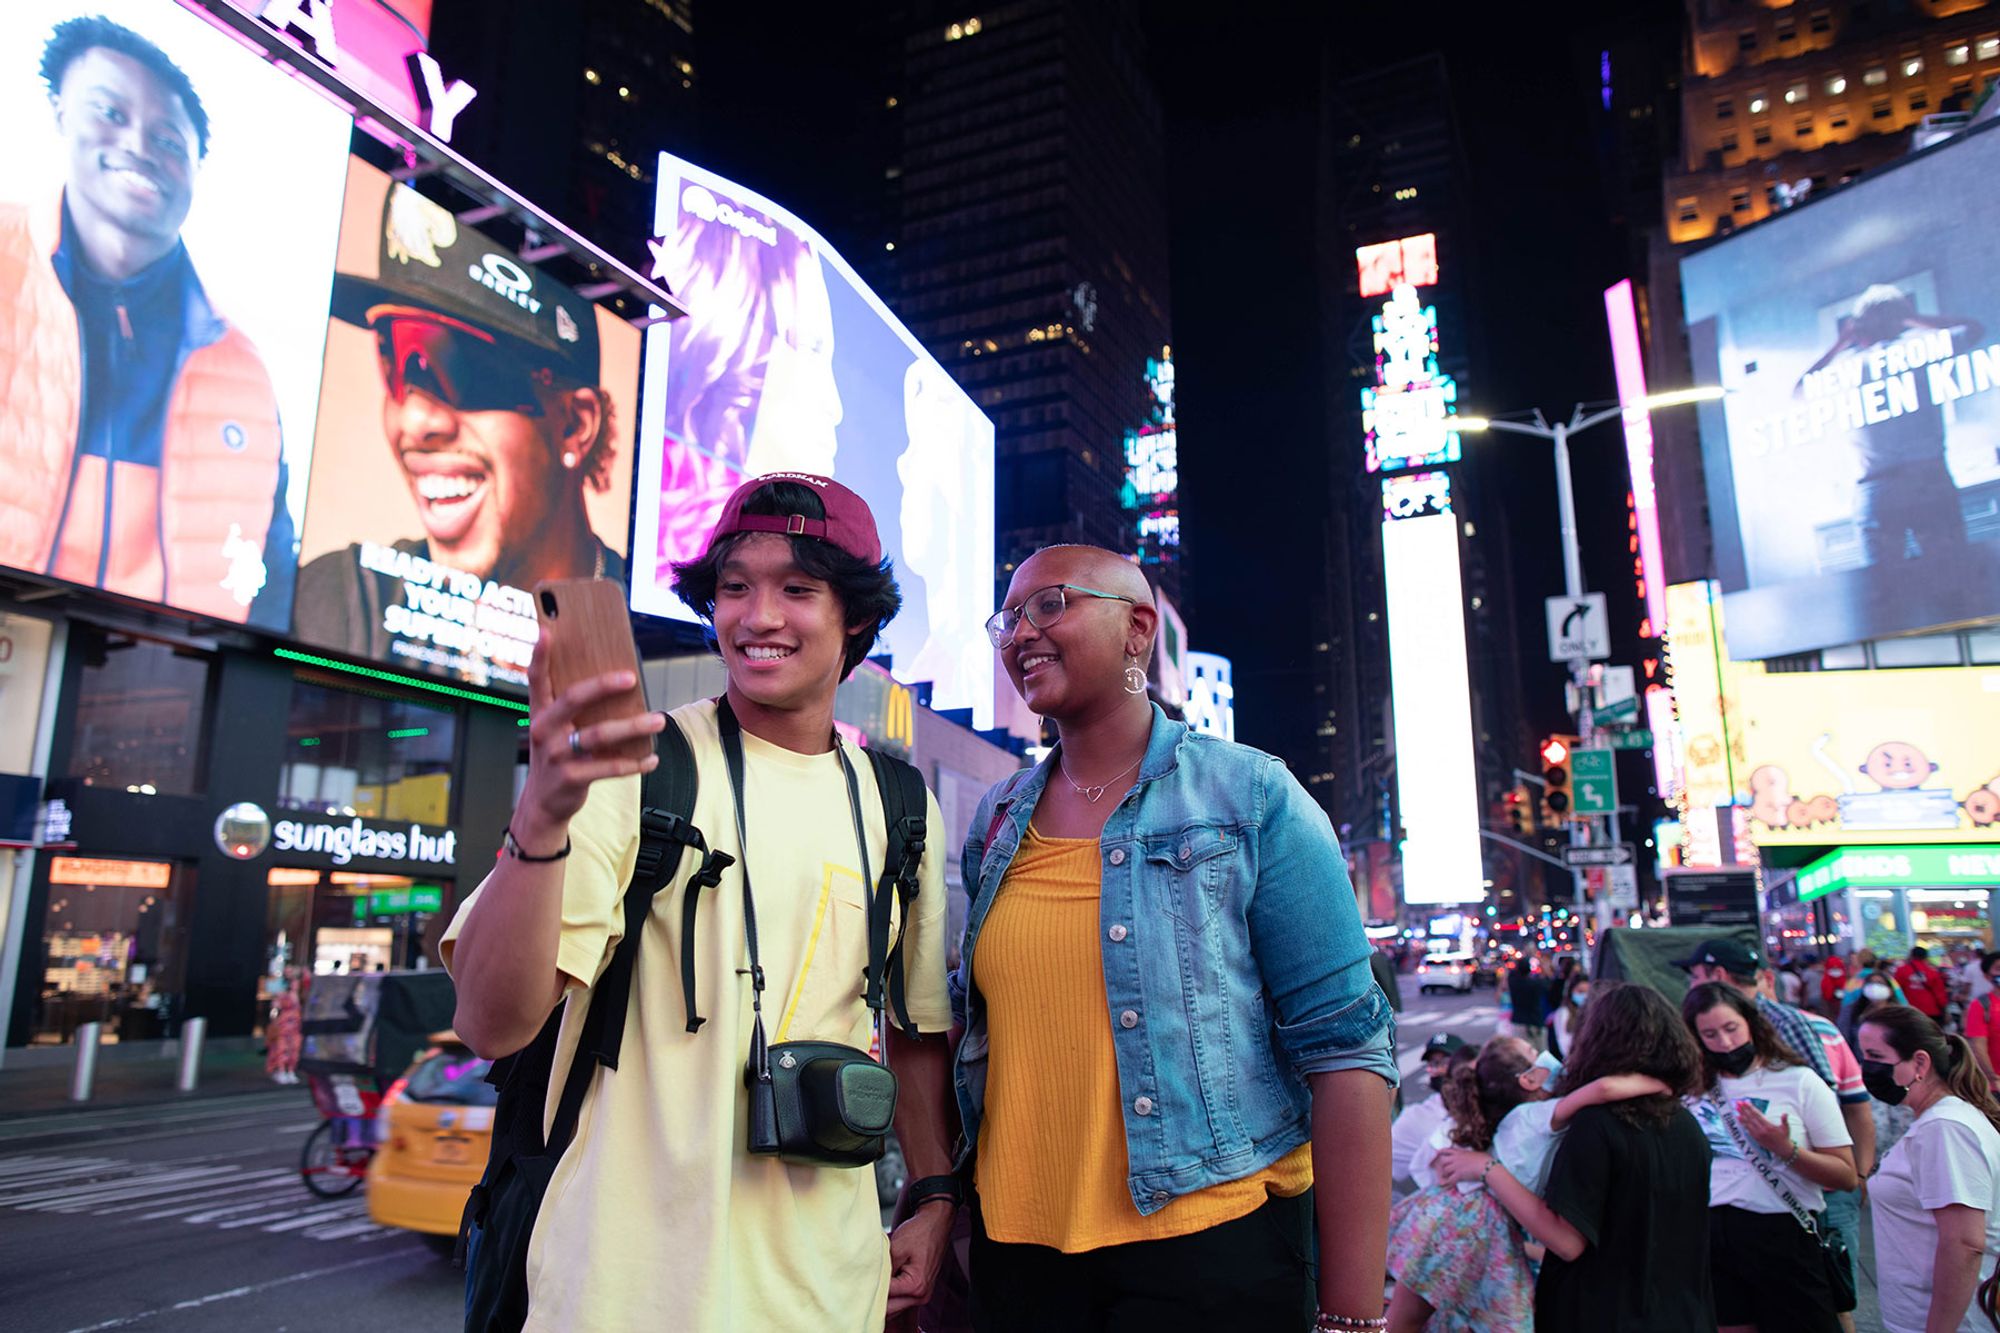 Fordham students look at a photo they took in Times Square